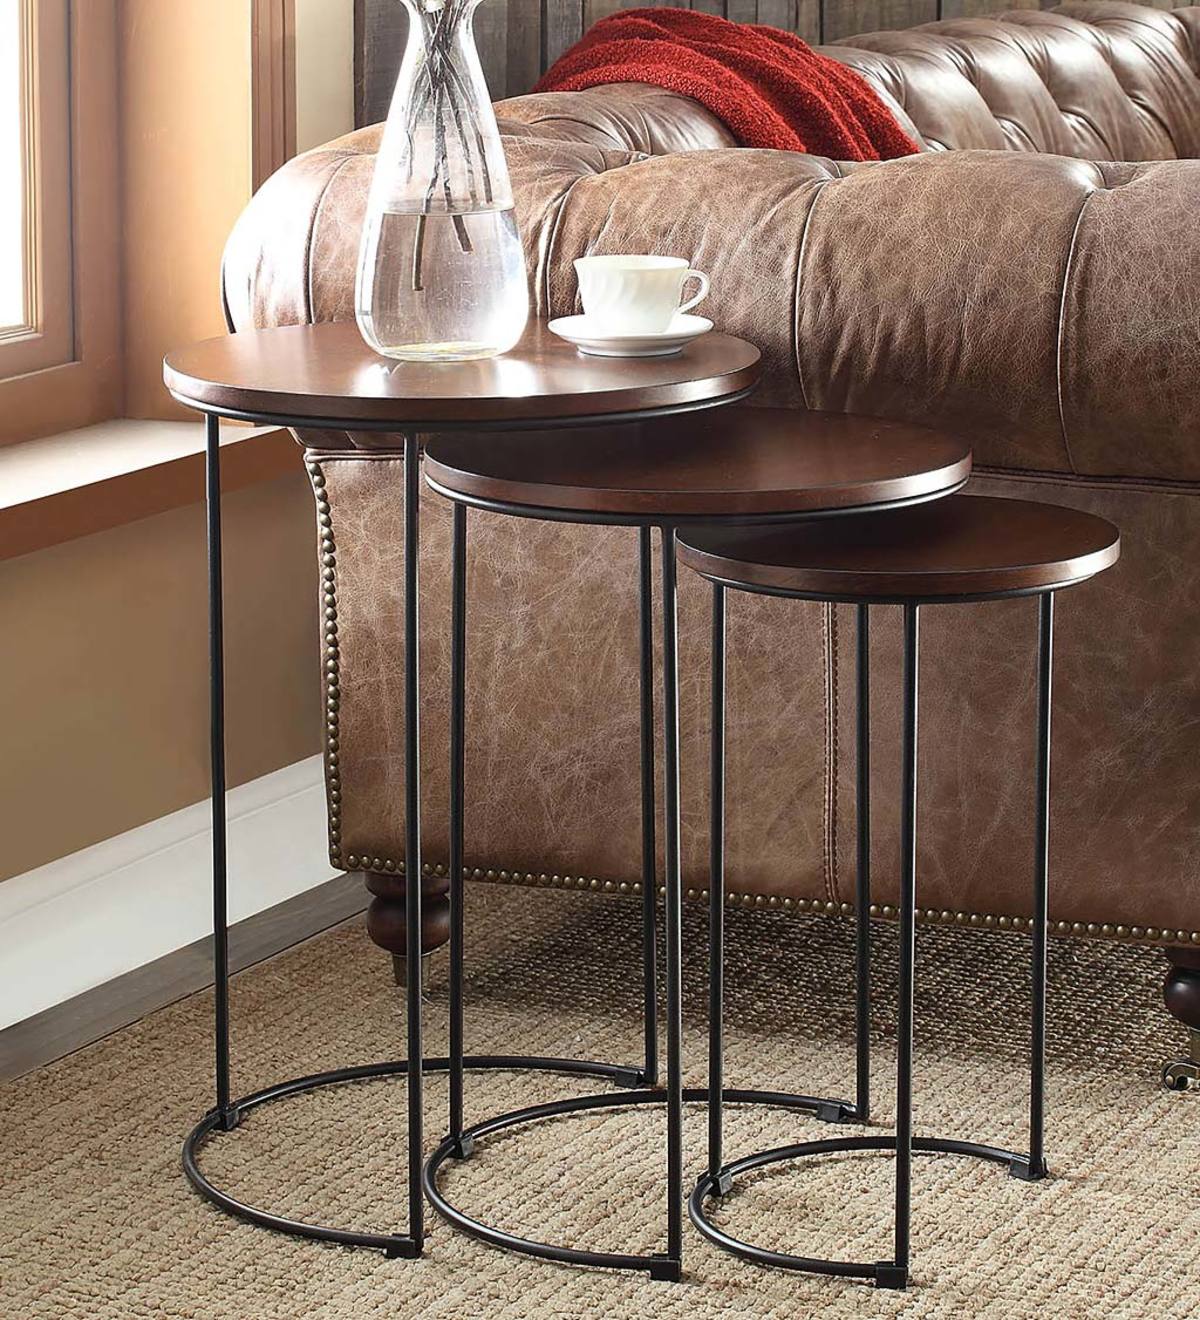 3-Piece Industrial Style Round Metal and Wood Nesting Tables